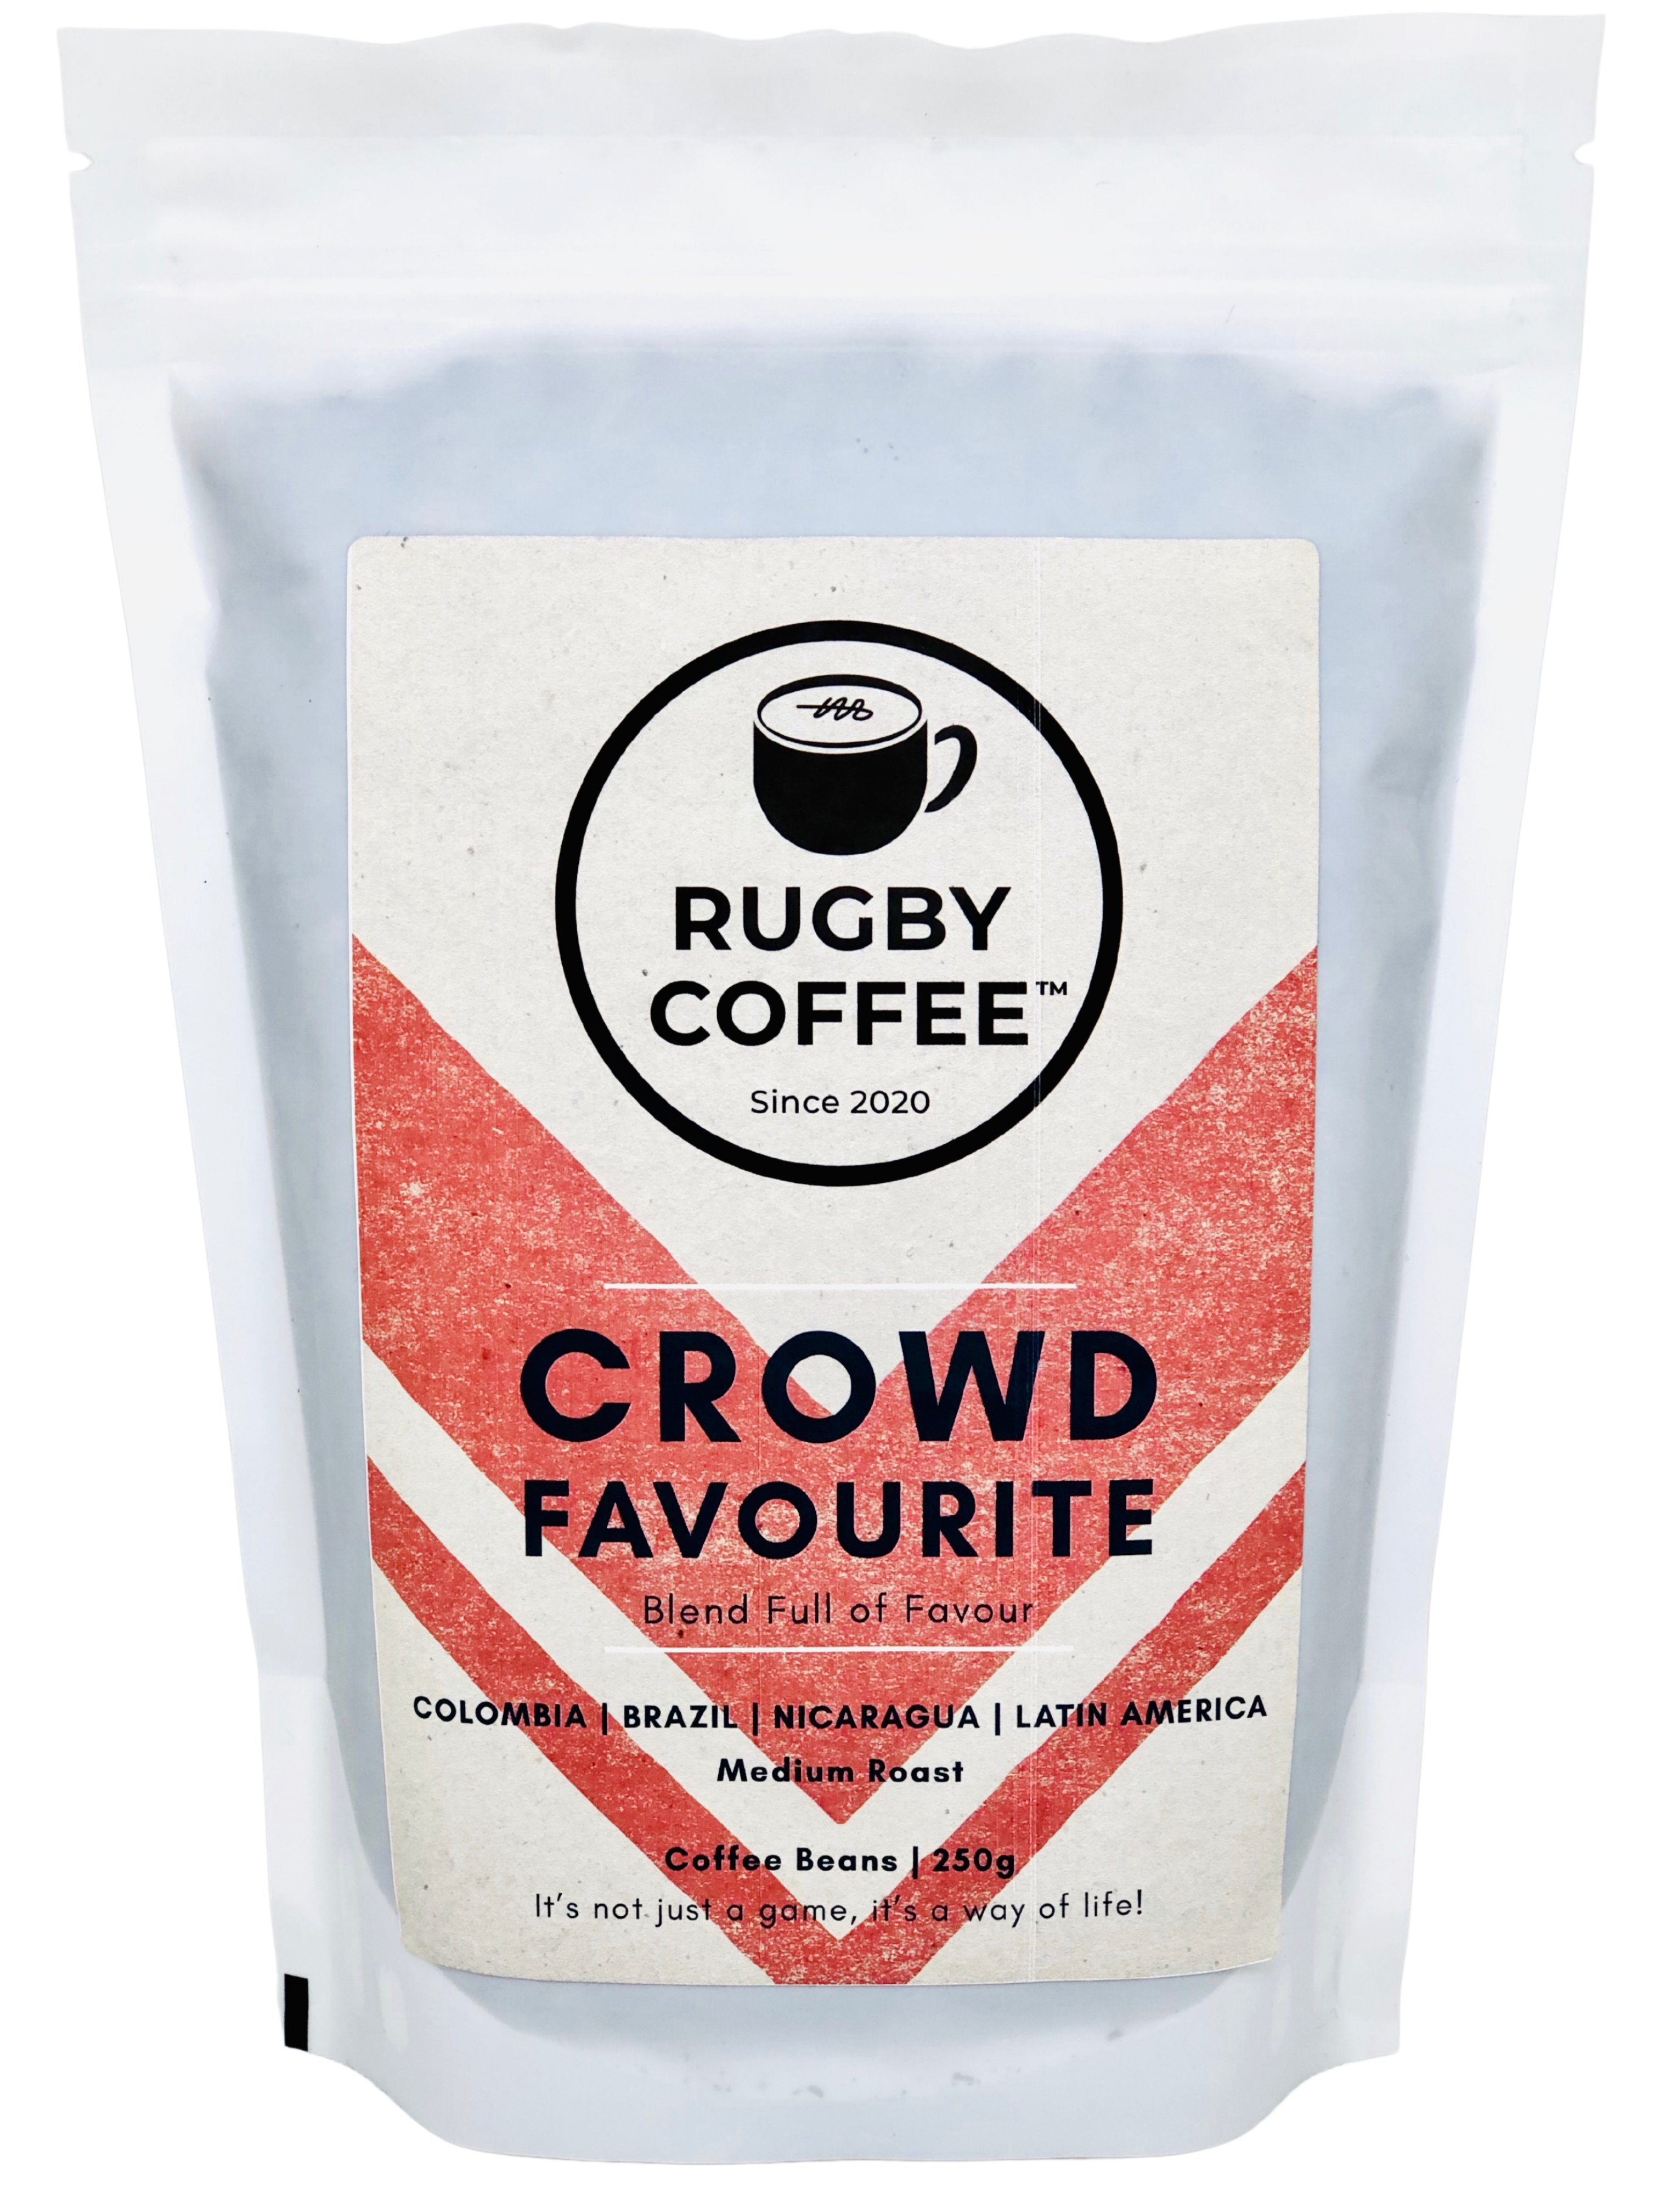 CROWD FAVOURITE 250g Coffee Beans